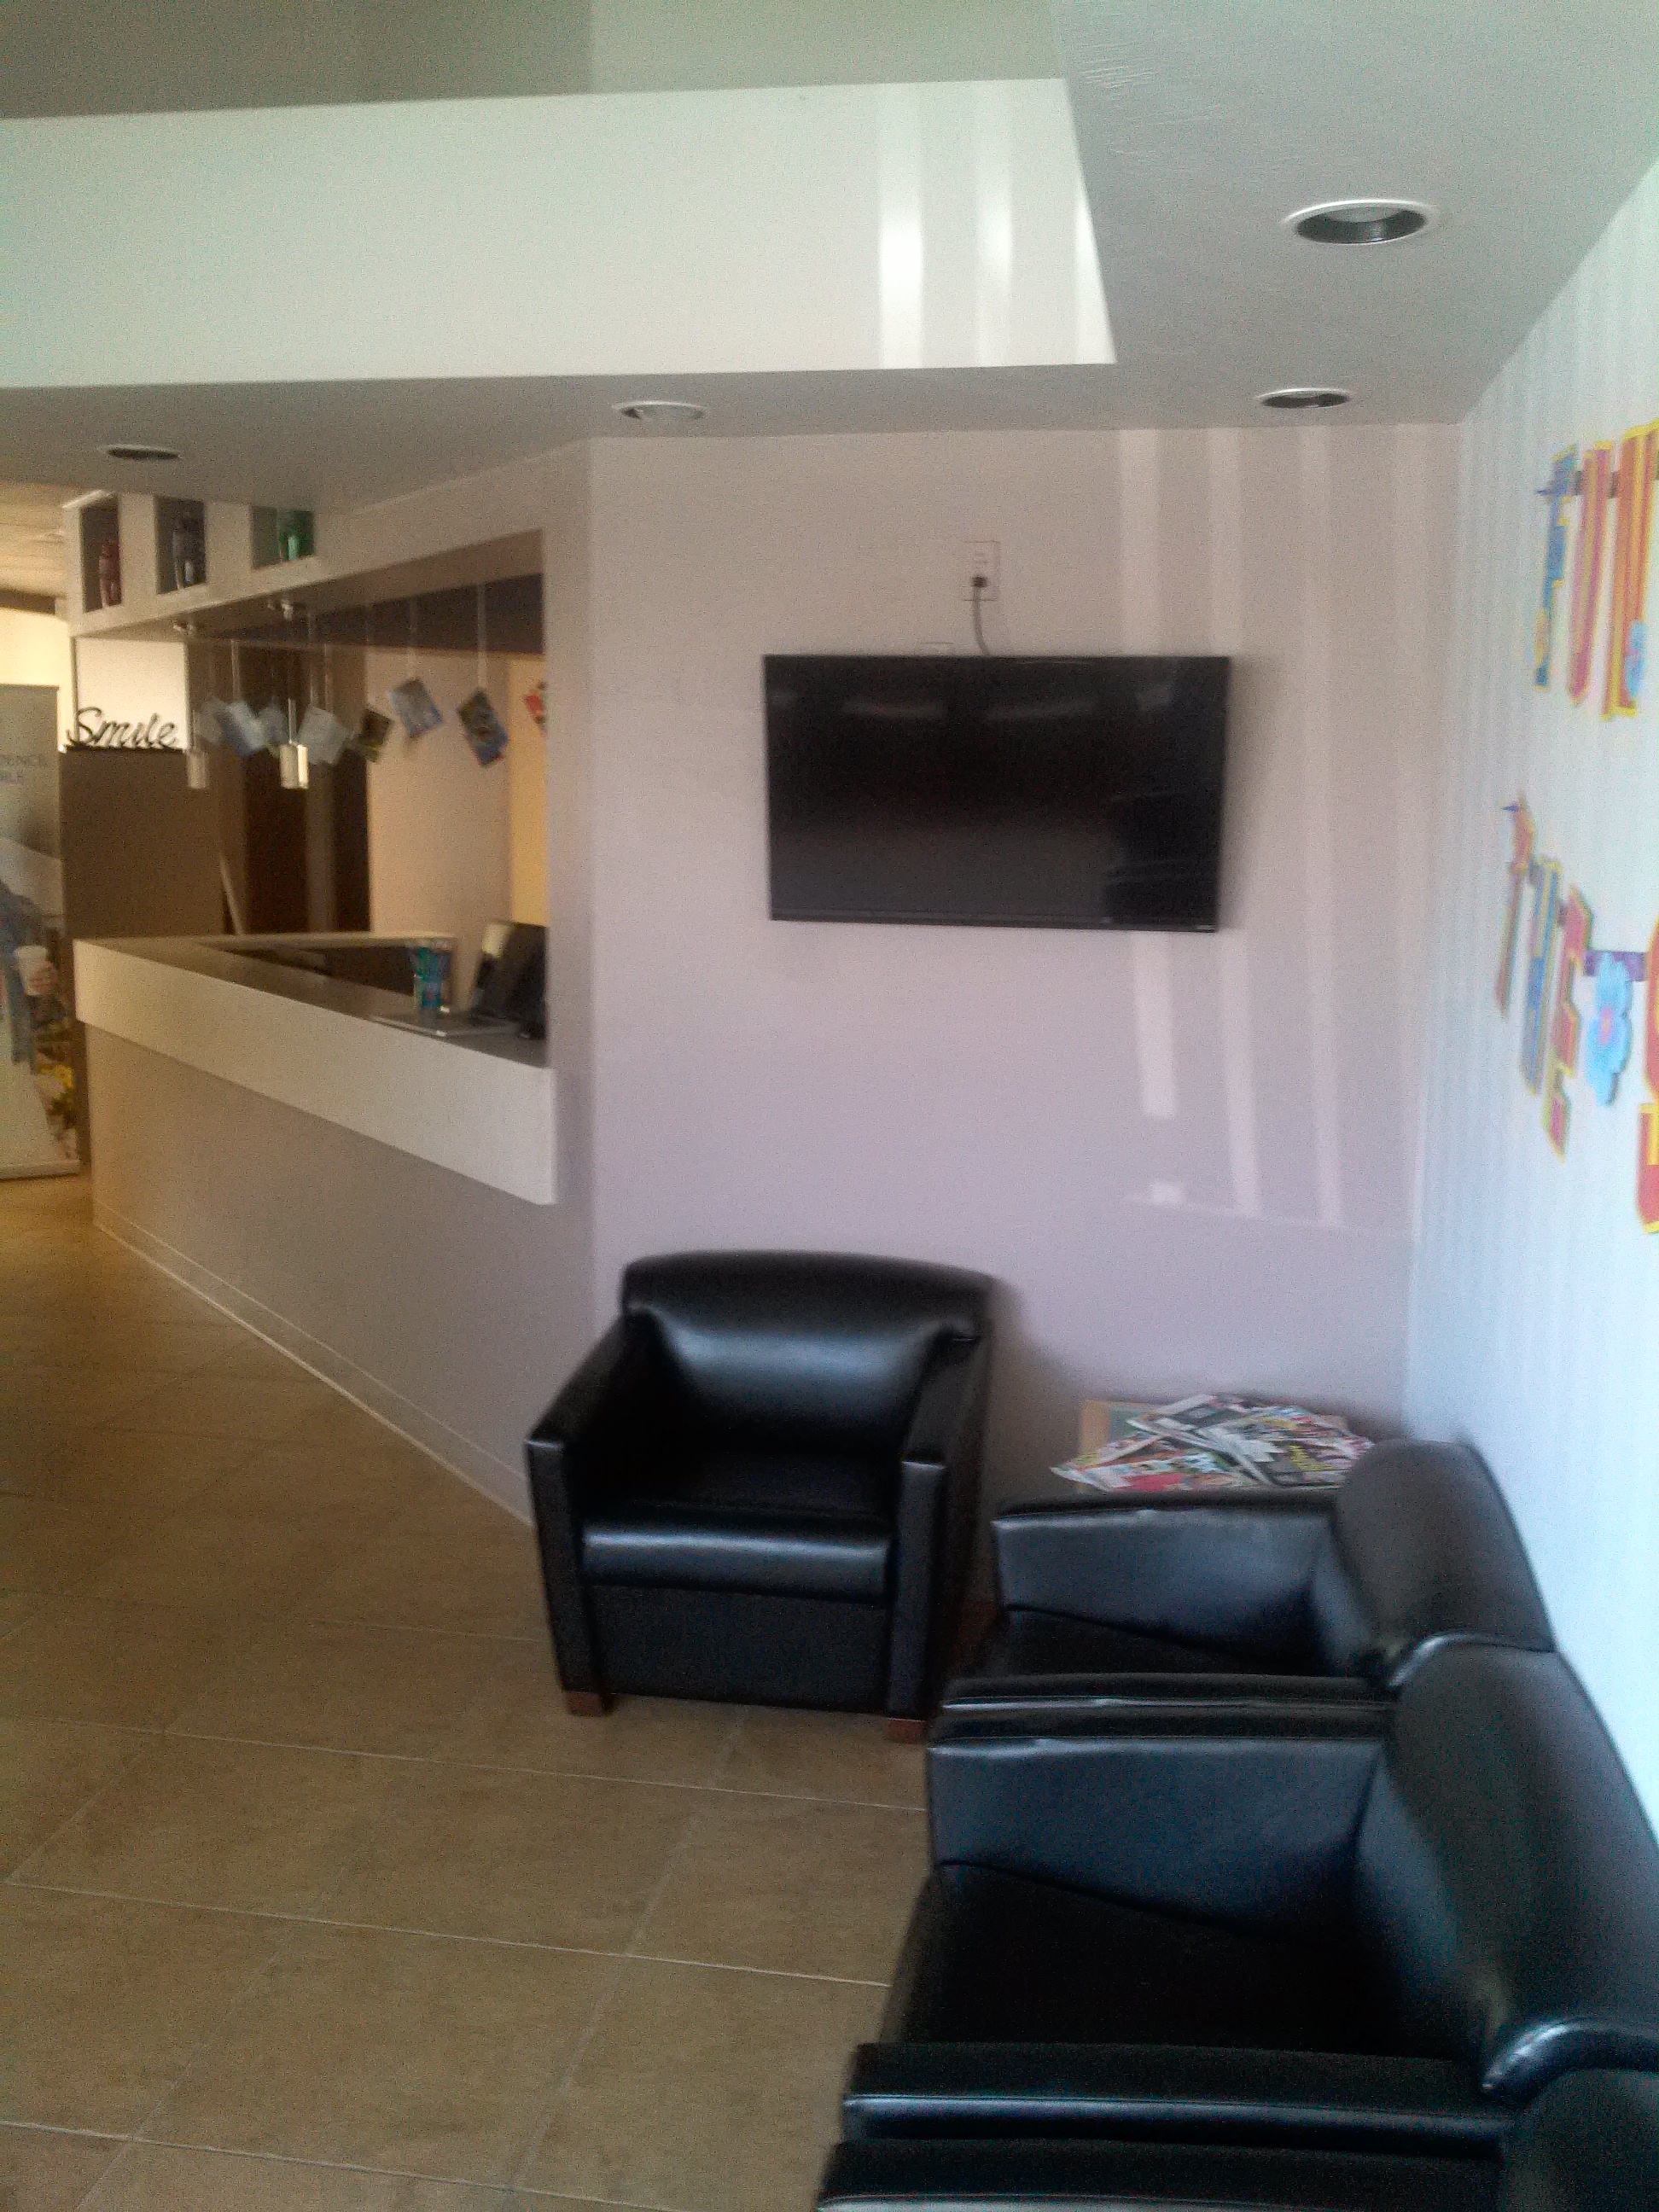 Commercial office reception area remodeling contractor project in Phoenix, AZ